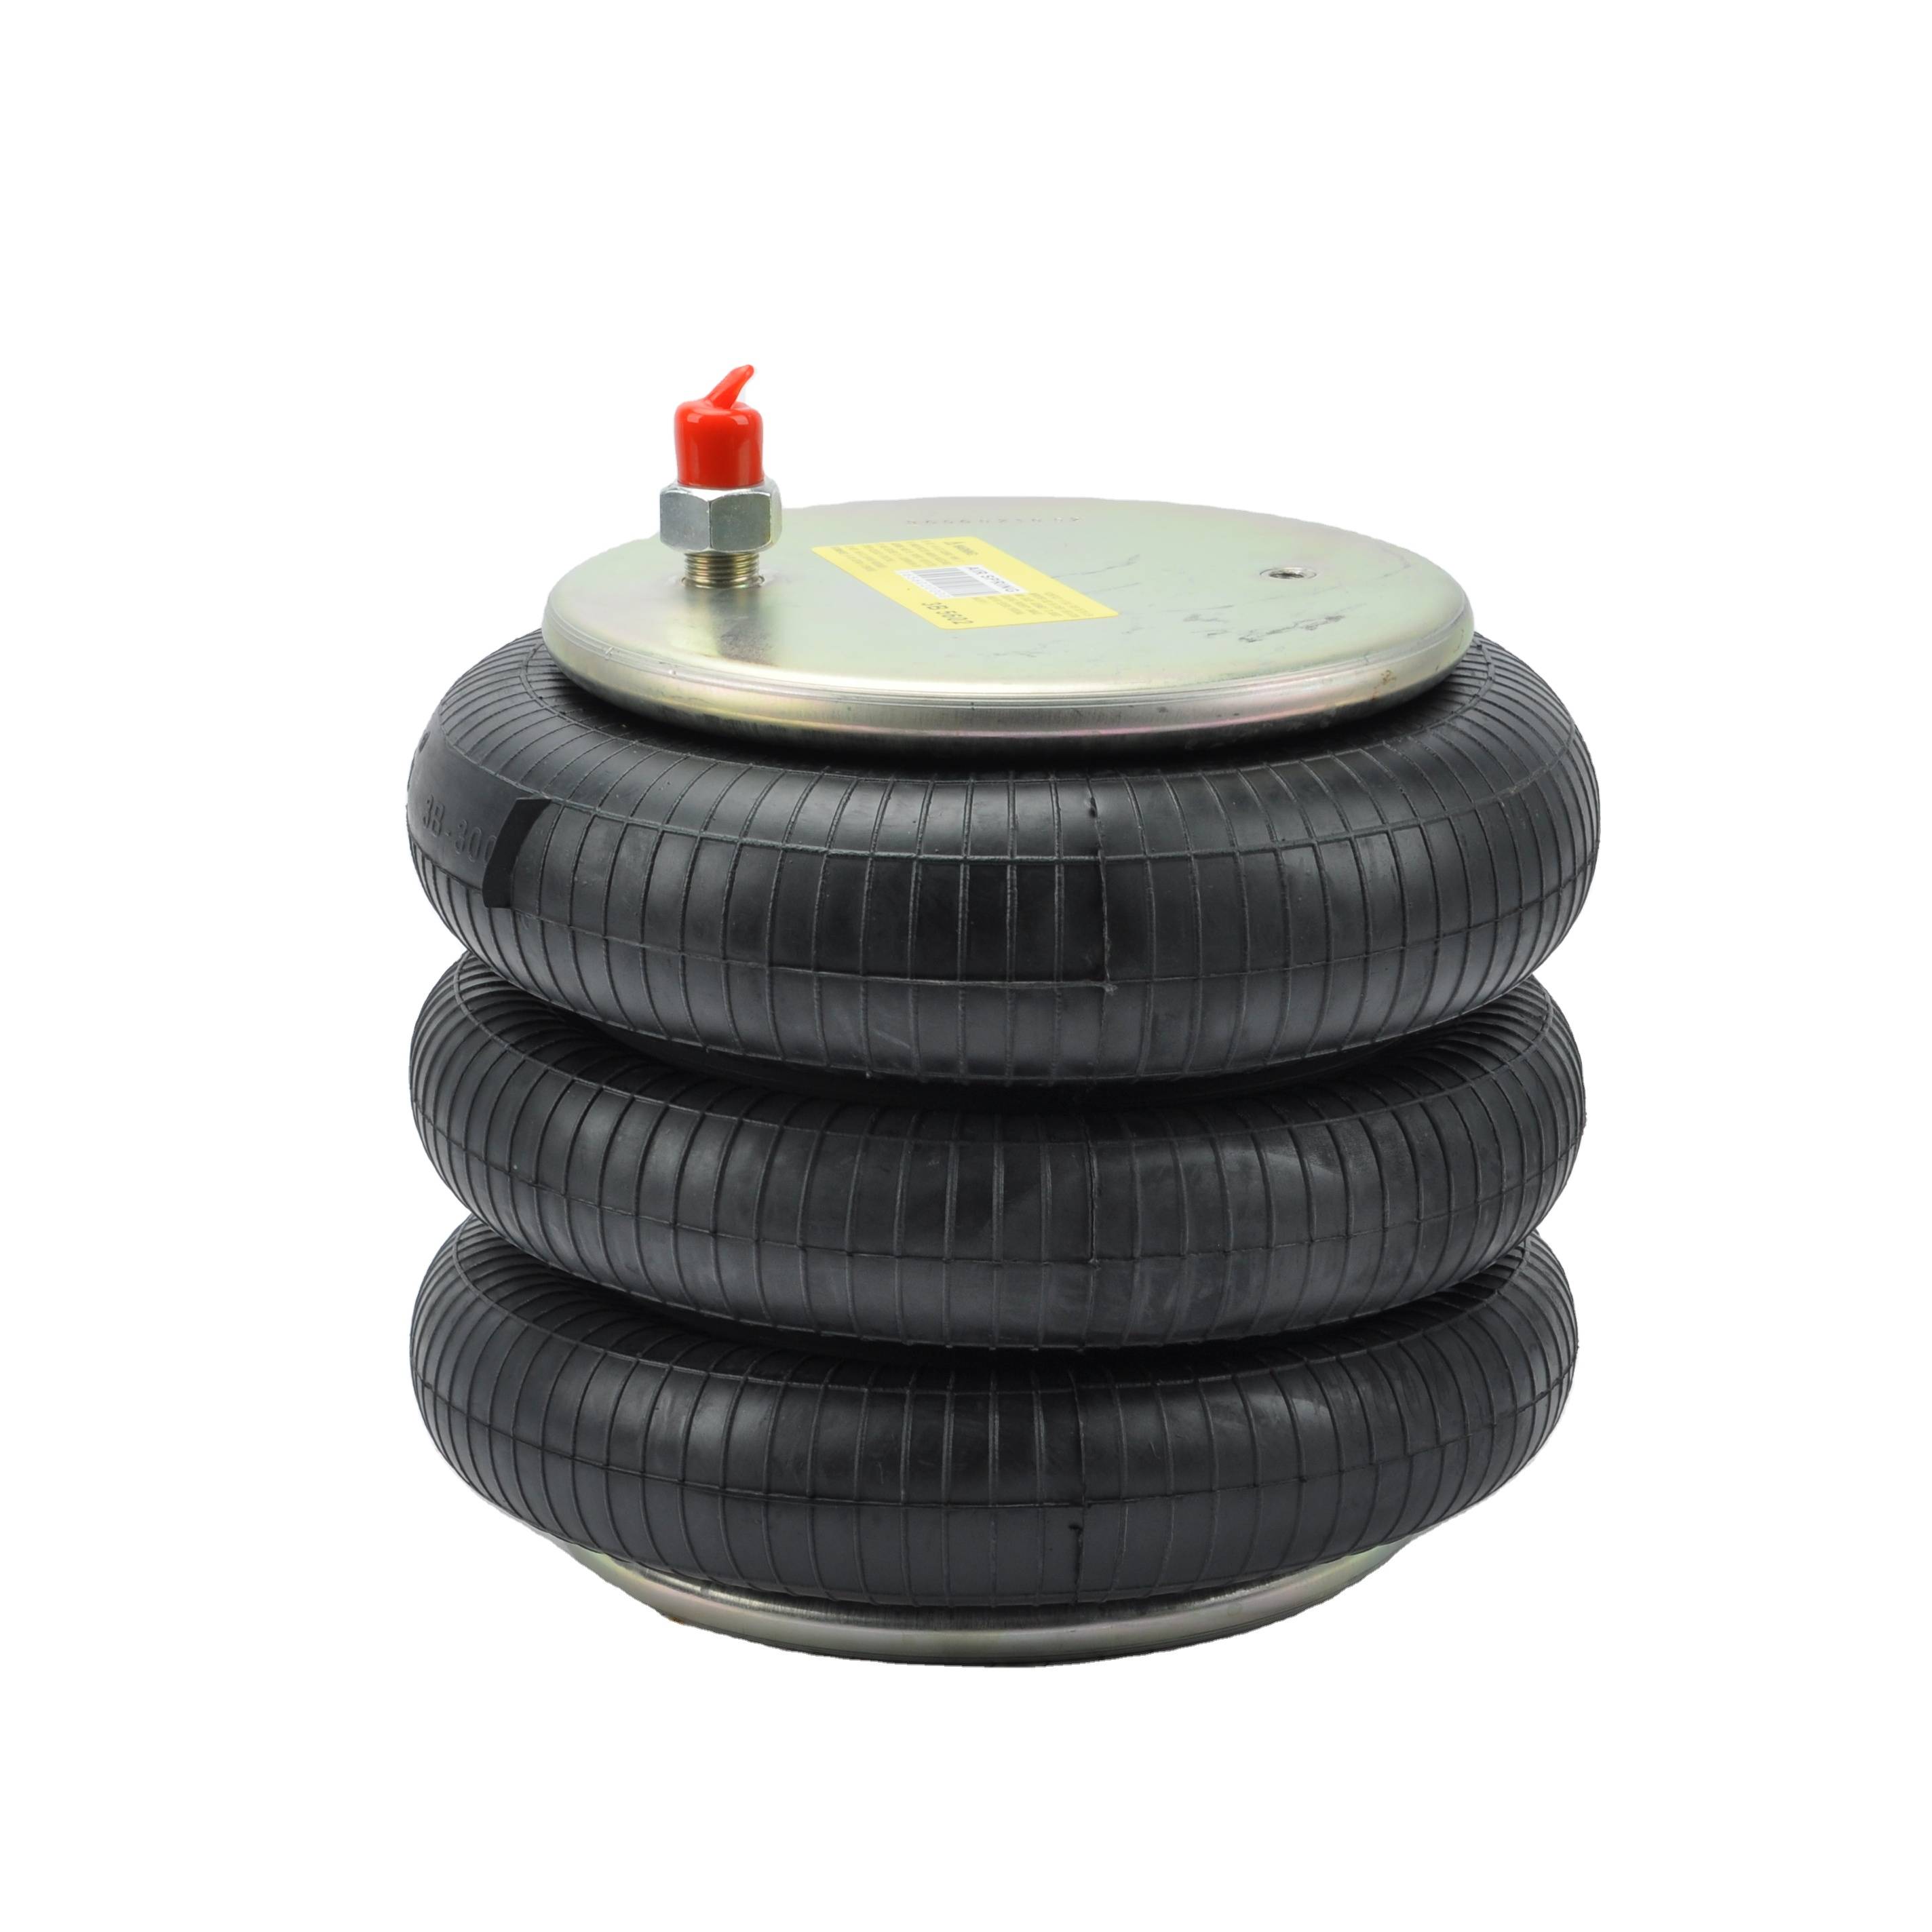 OUTLET PABRIK TRIPLE CONVOLUTED AIR SPRING FRESONE W01-358-7994/CONTITECH FT330-29546/GOODYEAR 3B12-328